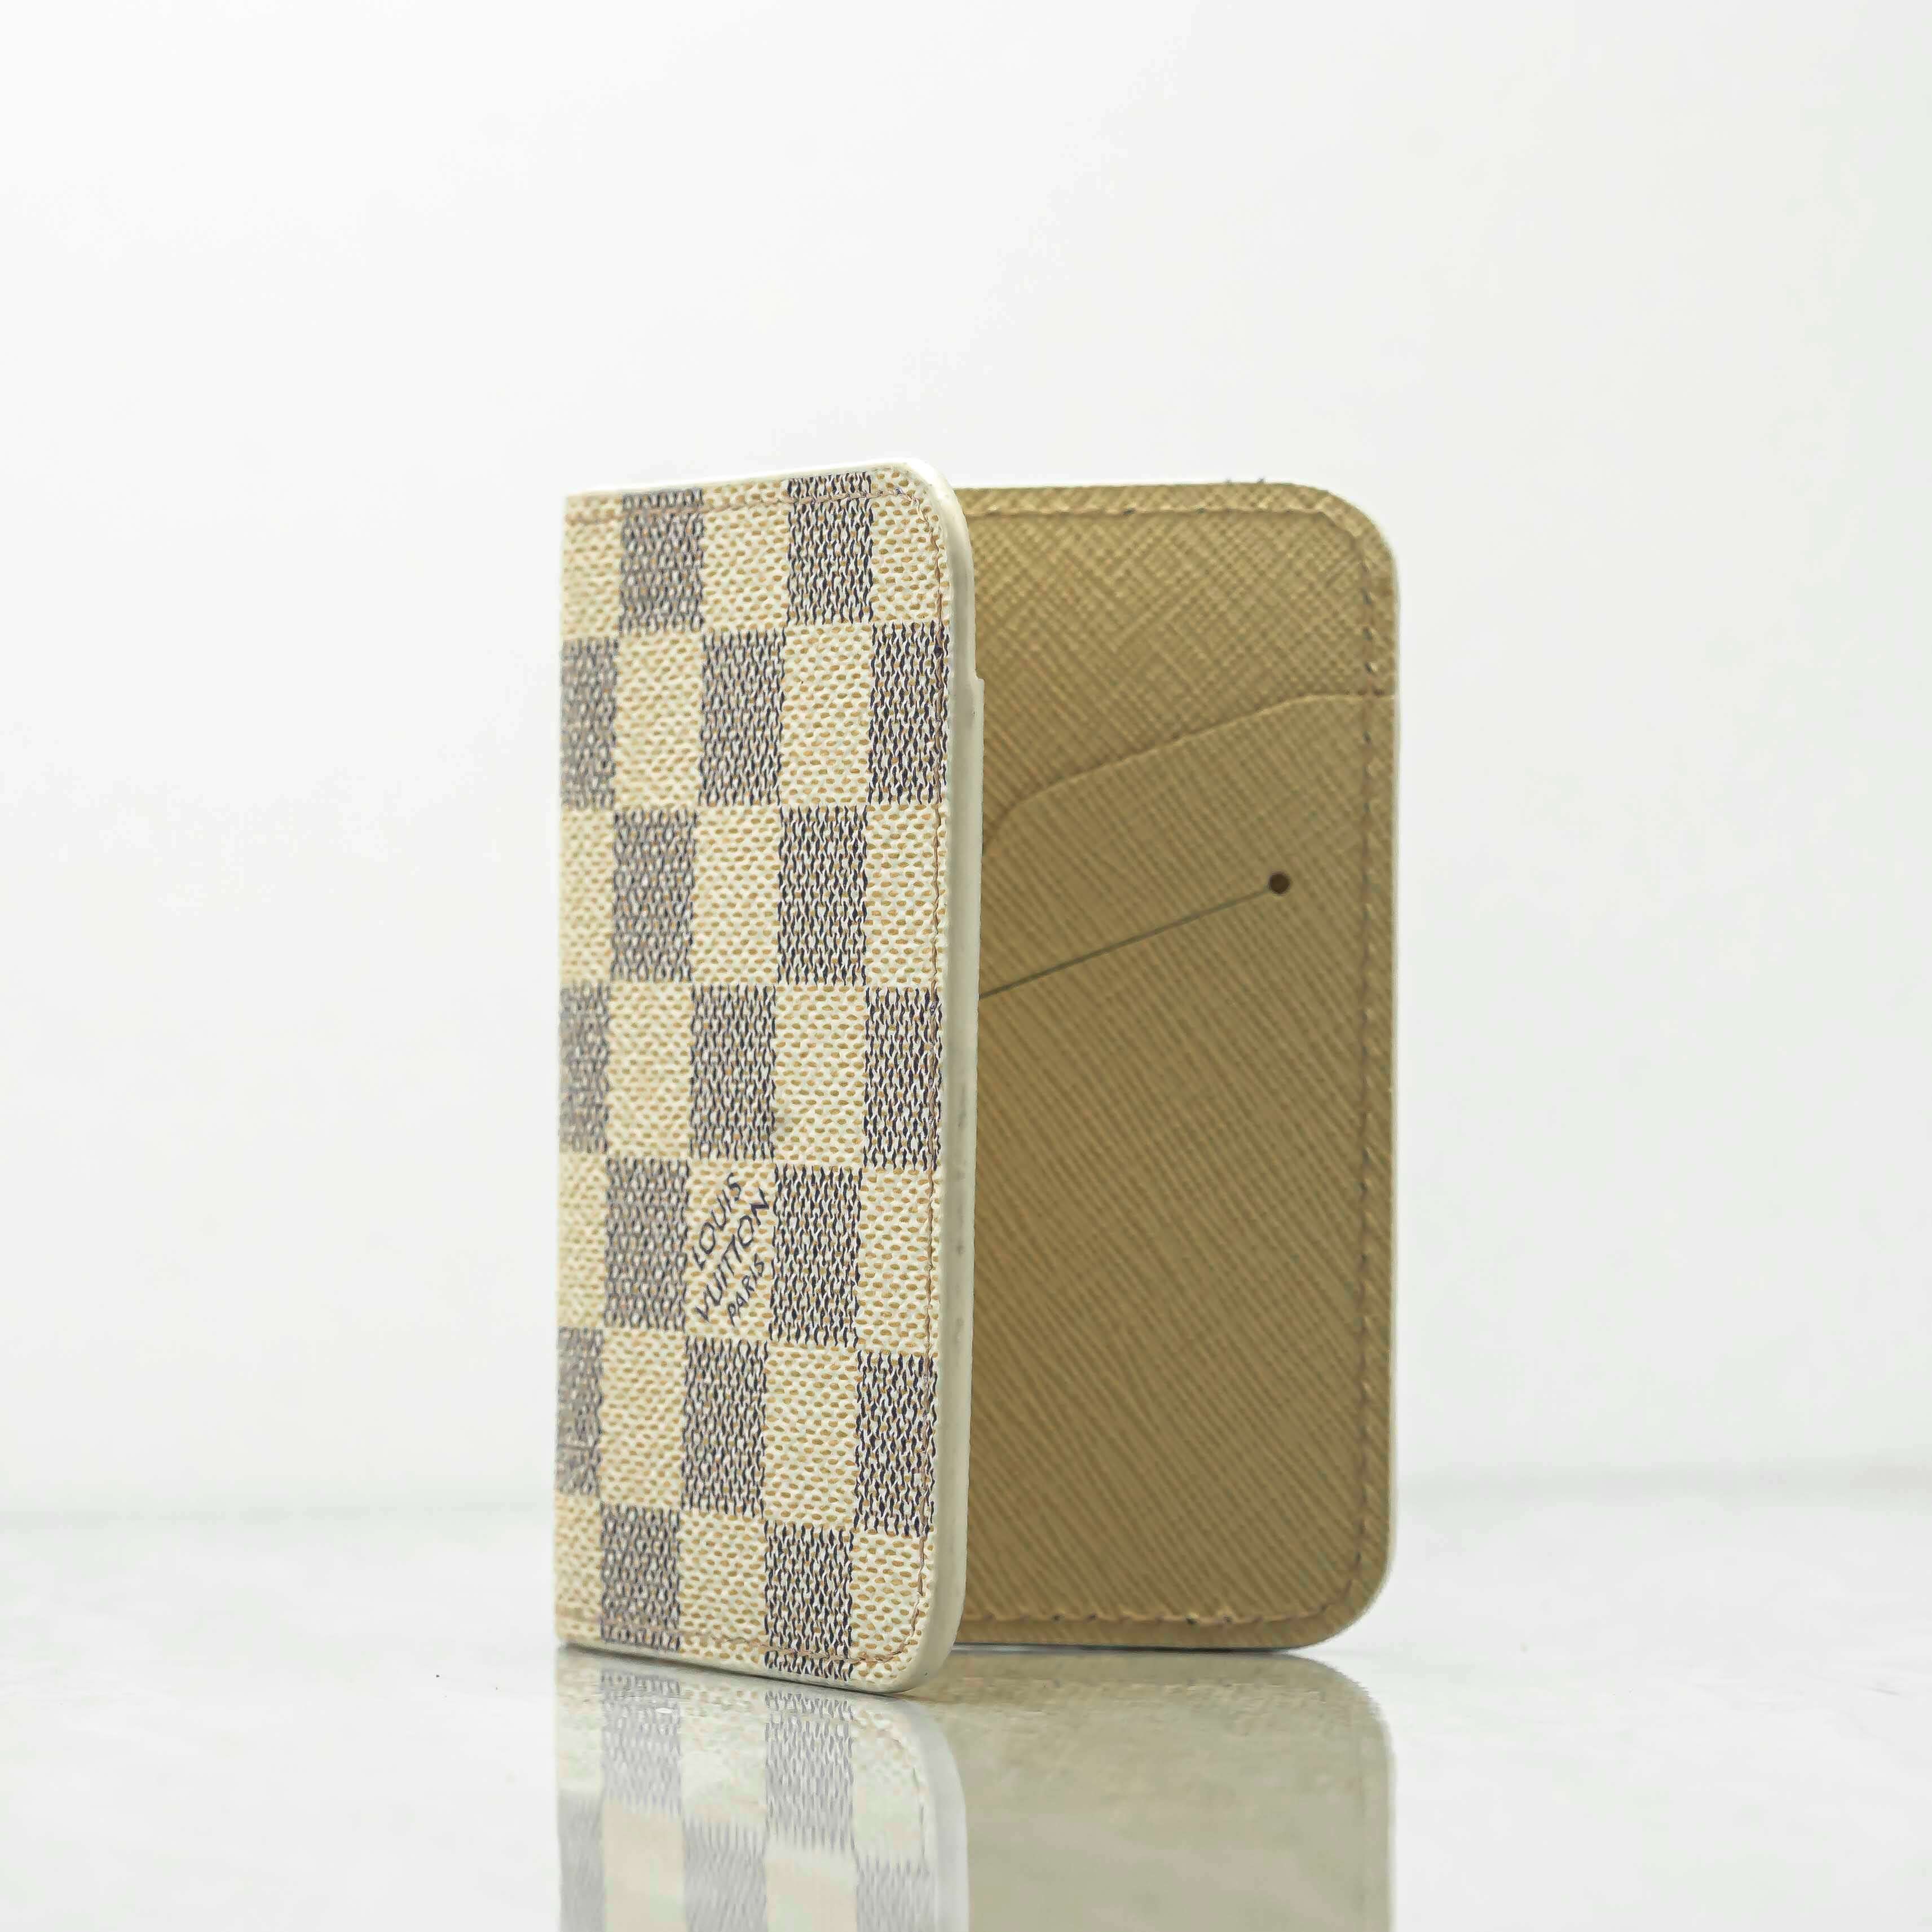 Upcycled Louis Vuitton 2-pocket Wallet - State & 3rd